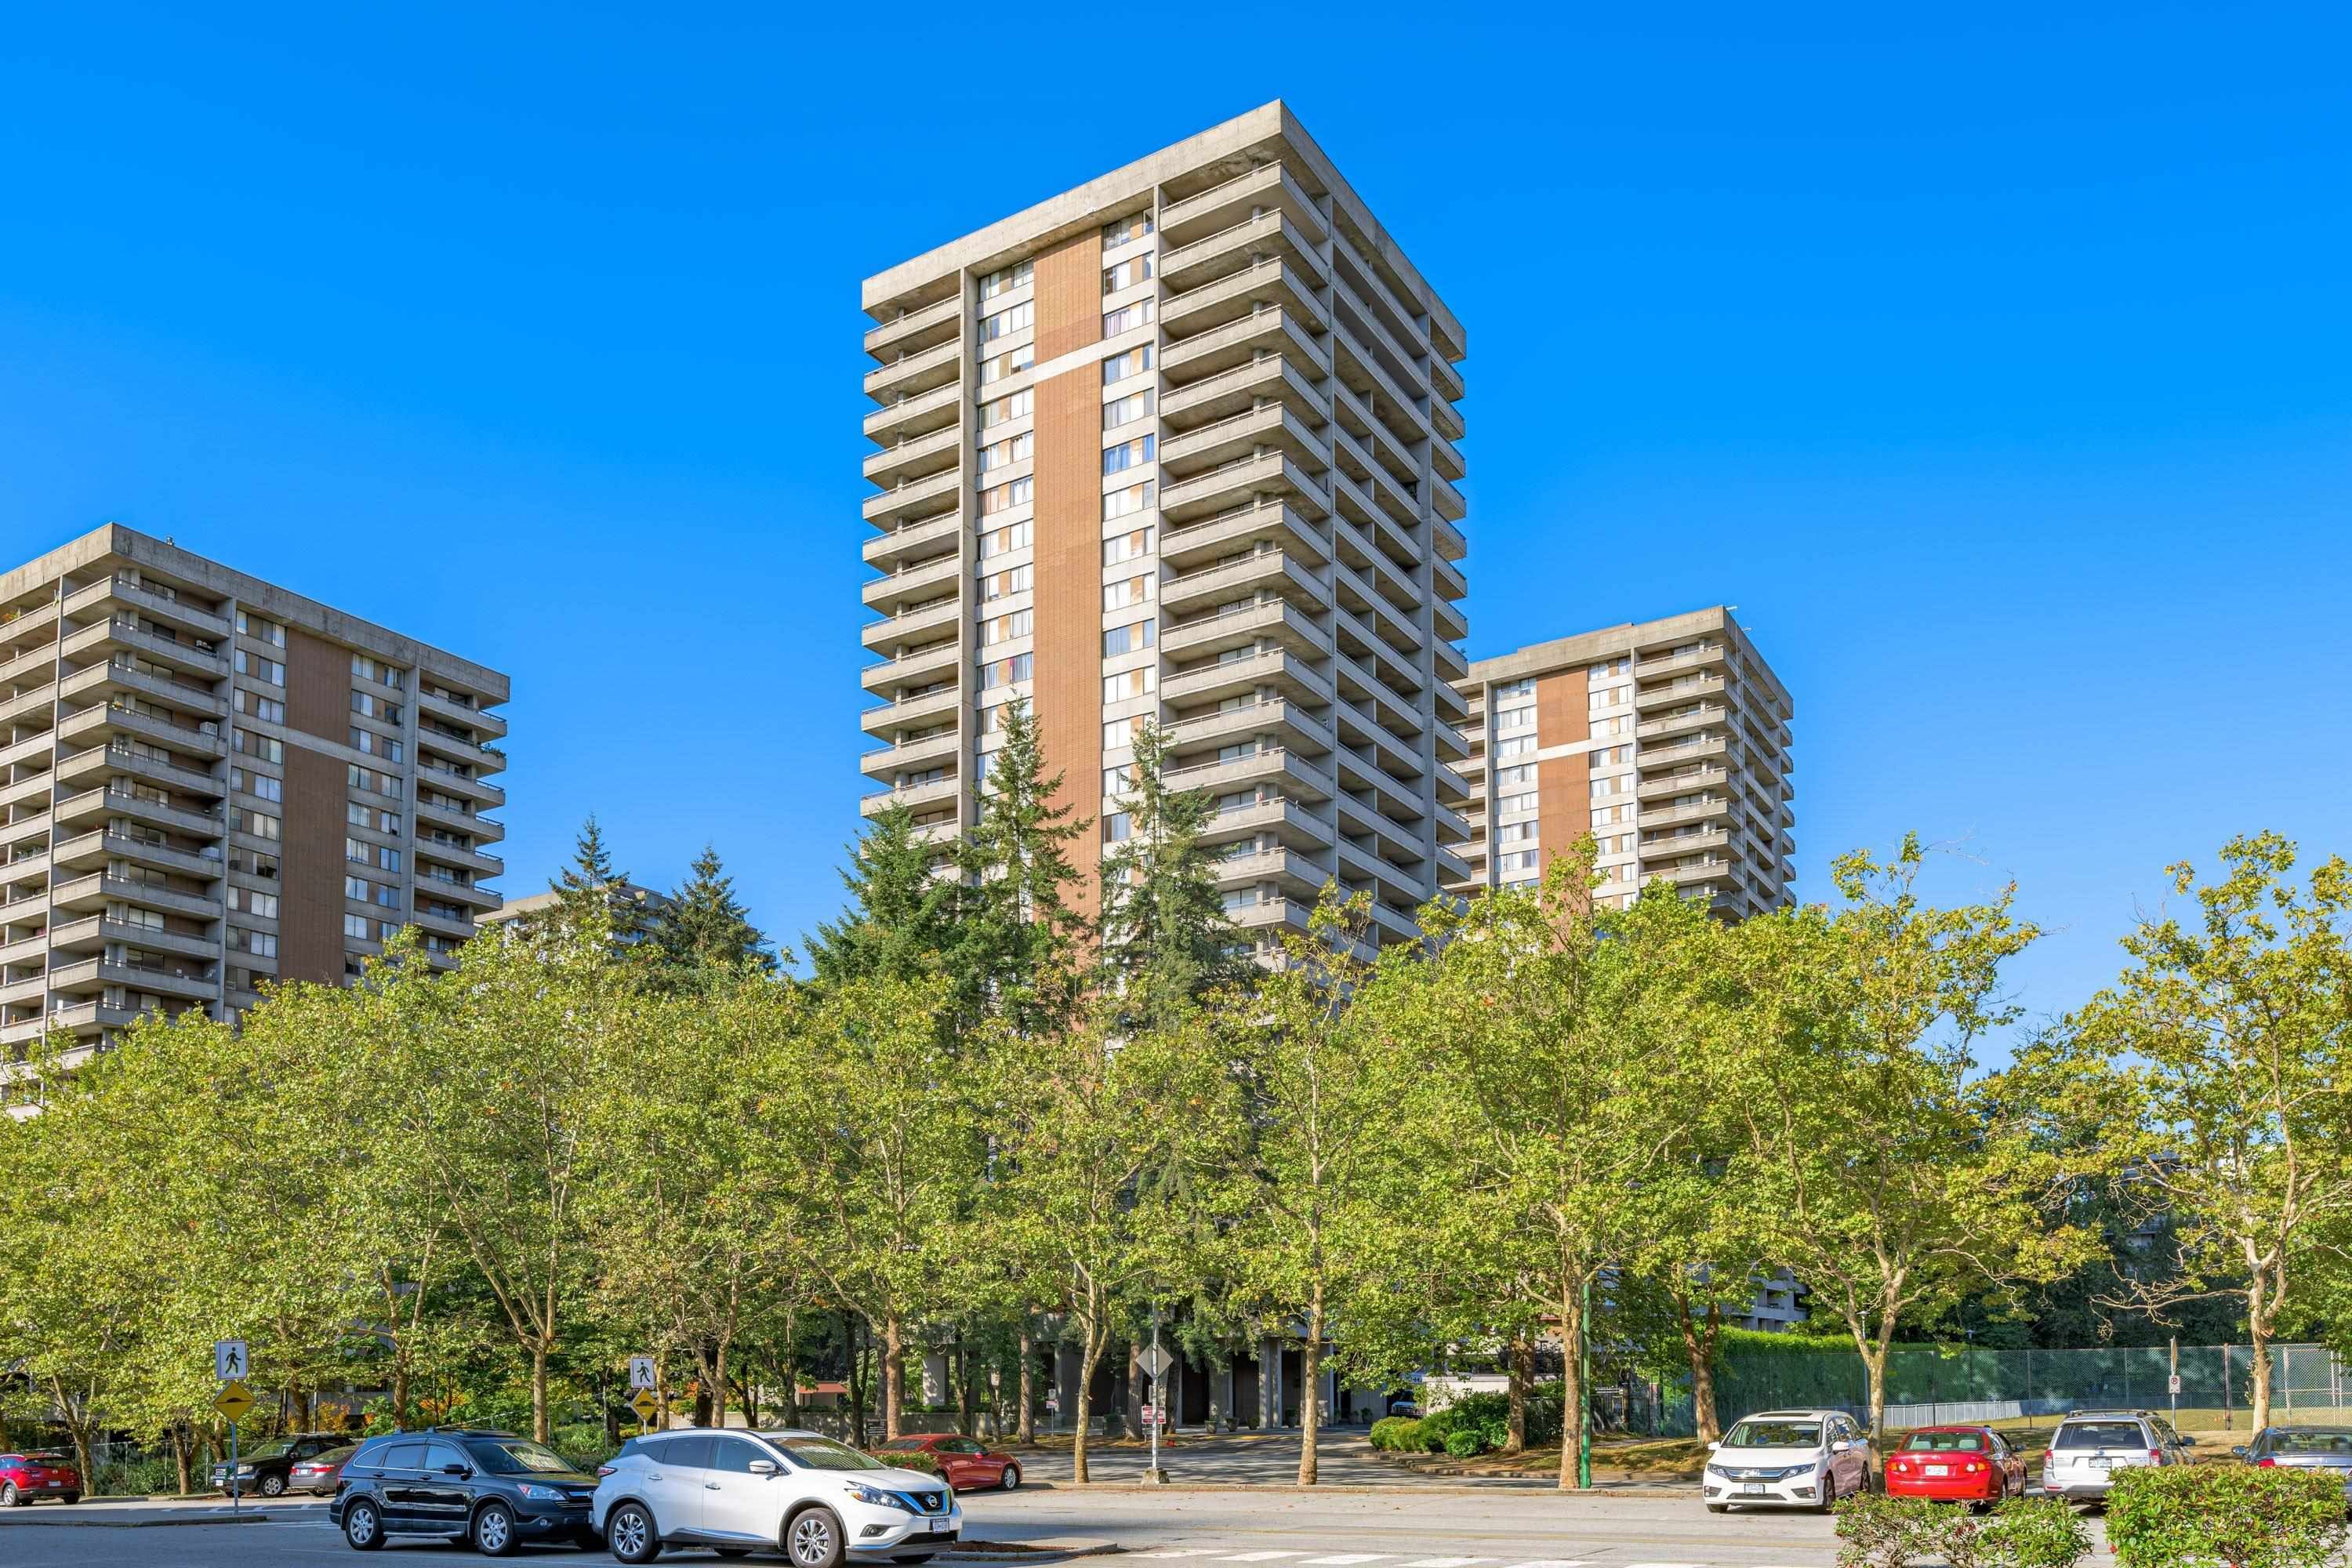 Open House. Open House on Saturday, September 9, 2023 11:00AM - 1:00PM
Beautifully Furnished & Total Updated 15th Floor 977 Sq ft Condo, The Oaks at Timberlea with 2 Spacious bedrms, 1 Main & Ensuite 1/2 bathroom. Near SFU in a very convenient loc